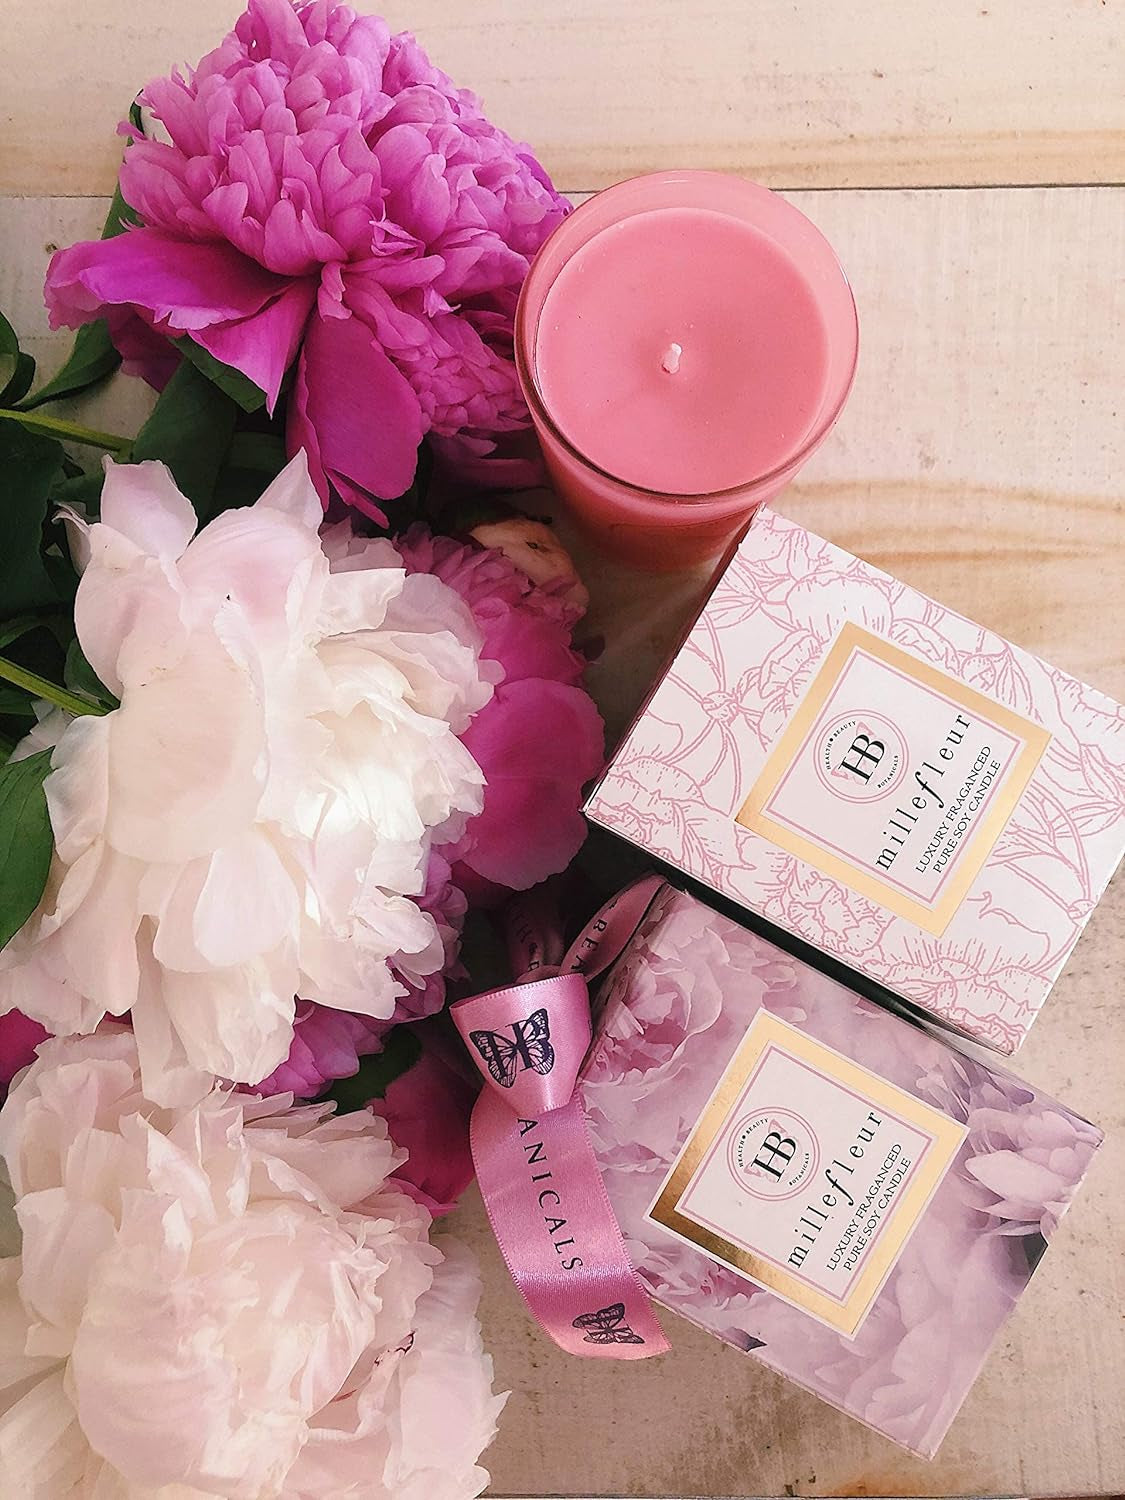 HB Botanicals Candle Millefleur Limited Edition/Luxury Scented Soy Candles/Hand Poured, Highly Scented & Clean Burn/7.5 Oz Frosted Pink Jar/Gold Embossed Gift Box/Color Printed Inner Box/Satin Bow.